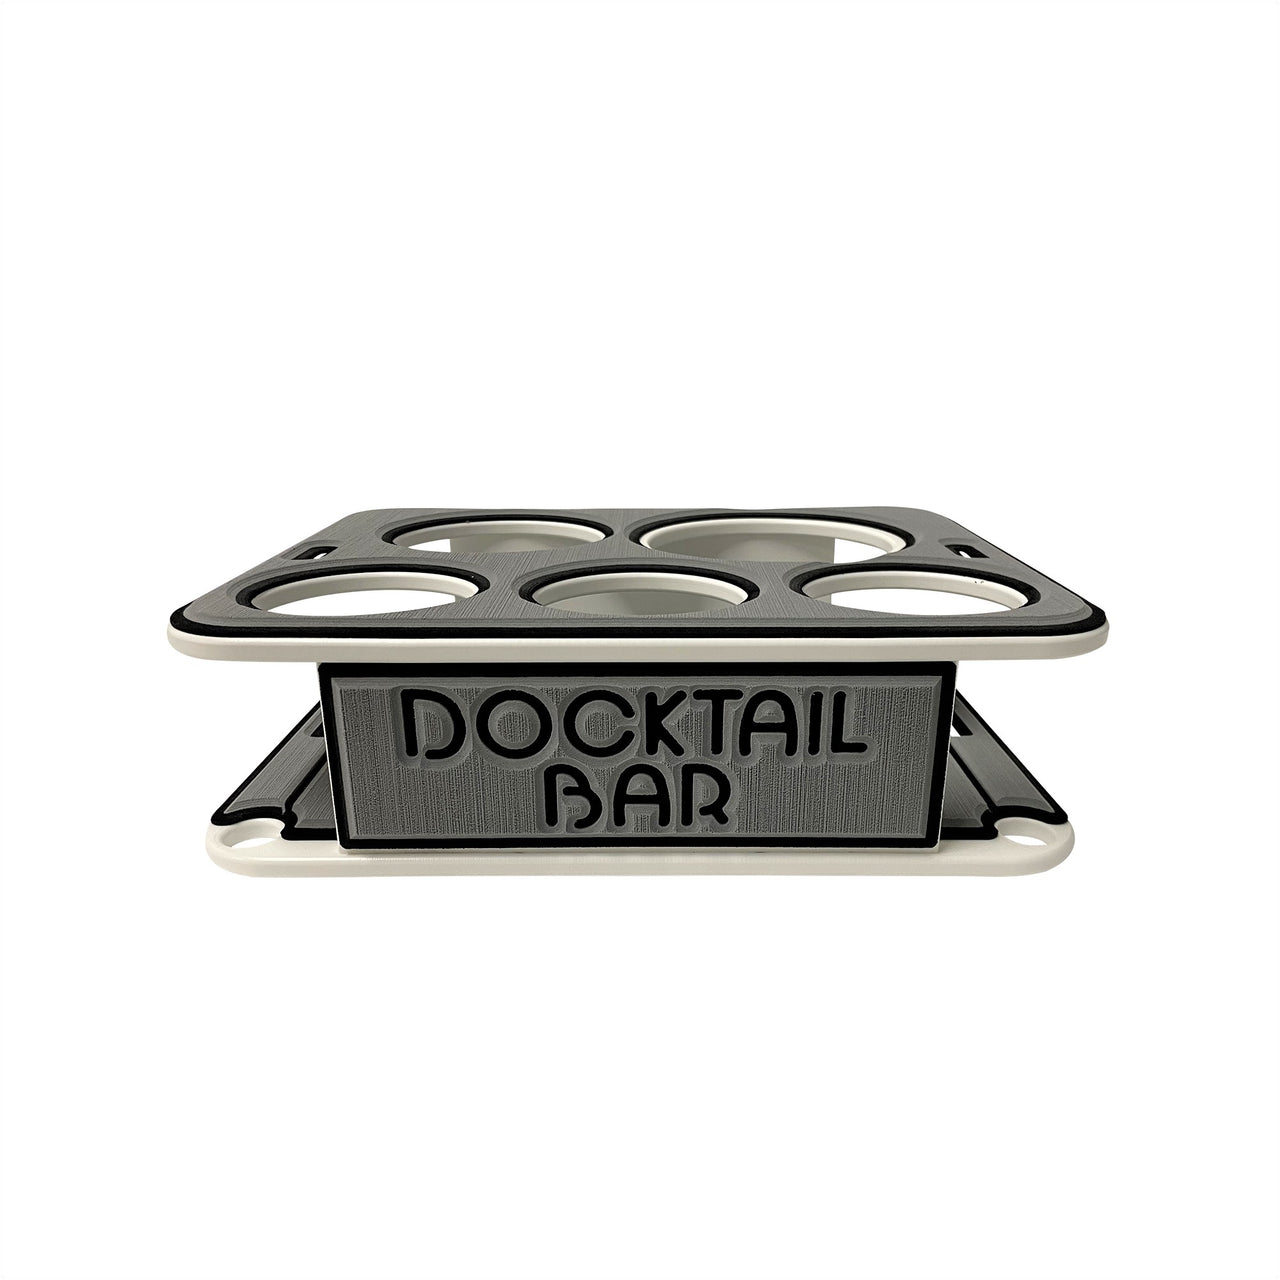 Marine Decking Accessory Kit for The Docktail Jr - Does NOT Include Table or Mount